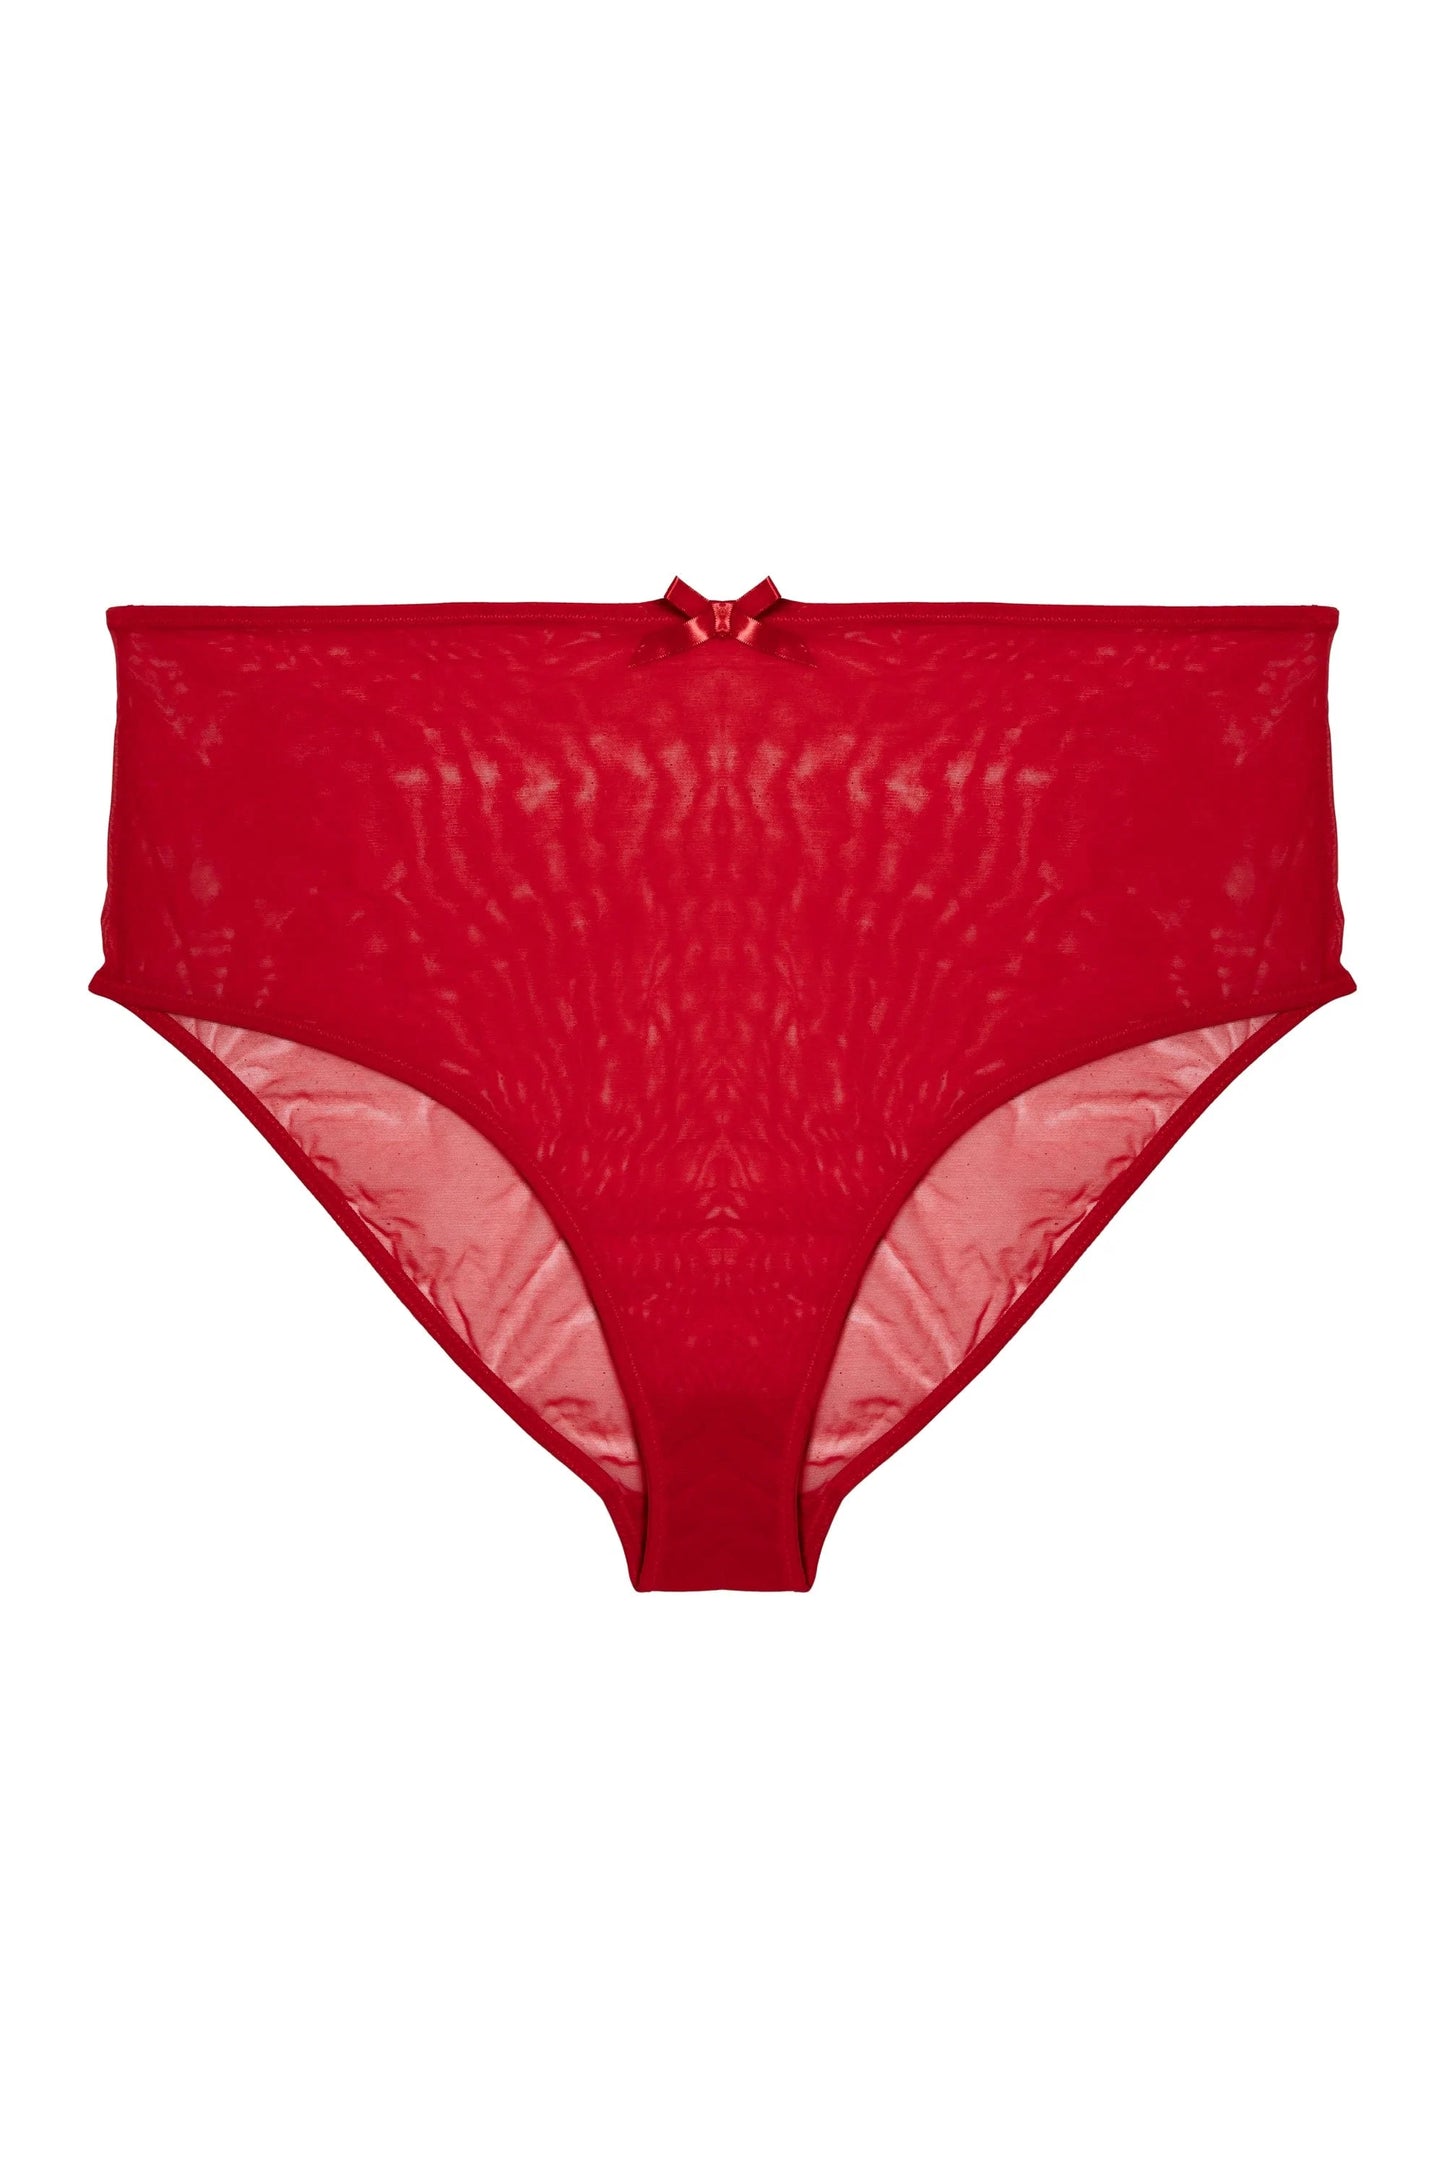 Conquer Club • View topic - Queen Elizabeth's Stained Underwear for Sale on